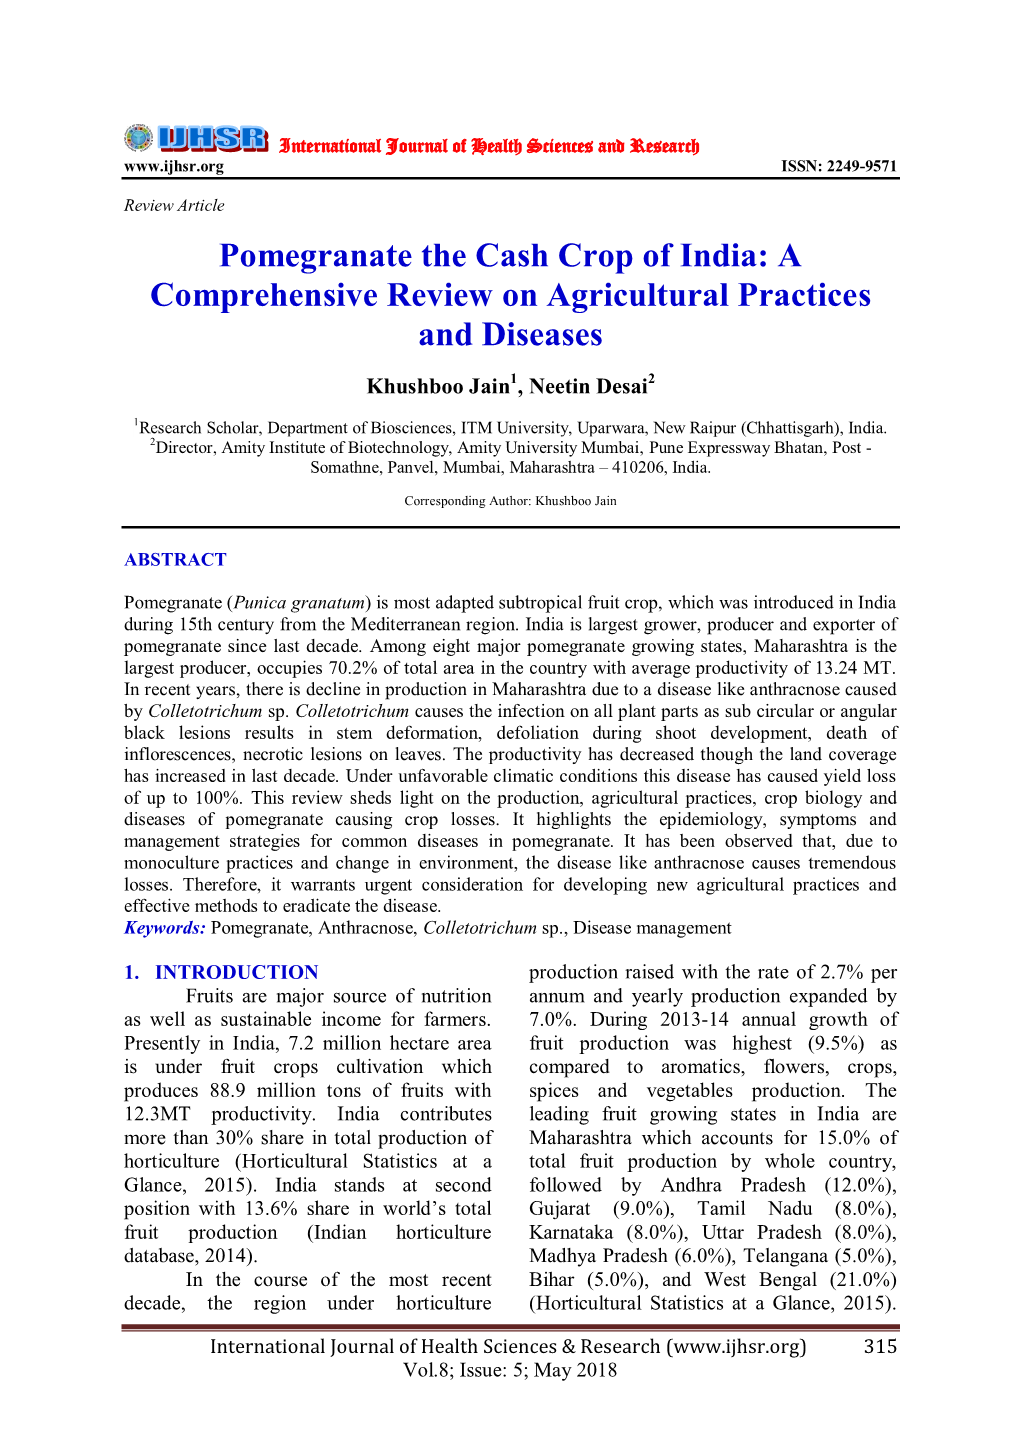 Pomegranate the Cash Crop of India: a Comprehensive Review on Agricultural Practices and Diseases